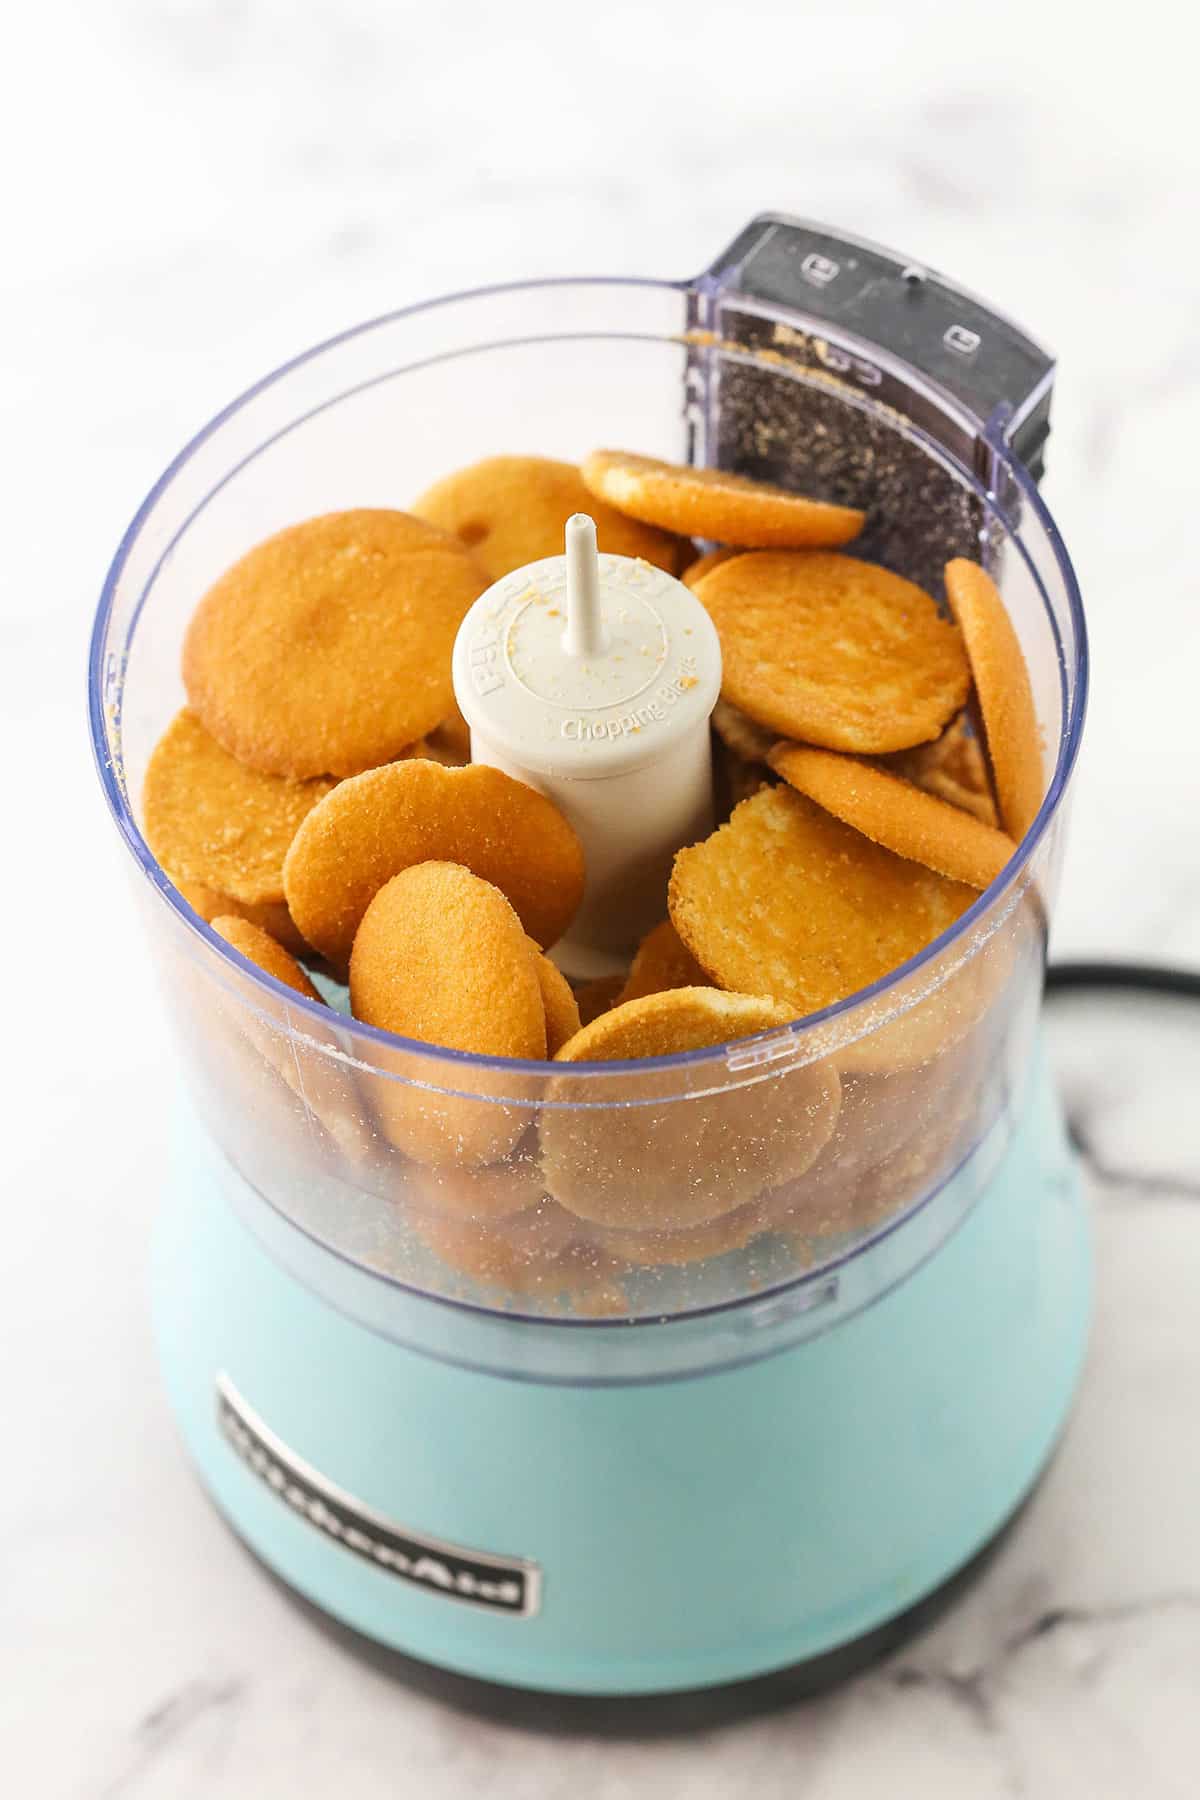 Nilla wafer cookies in a food processor